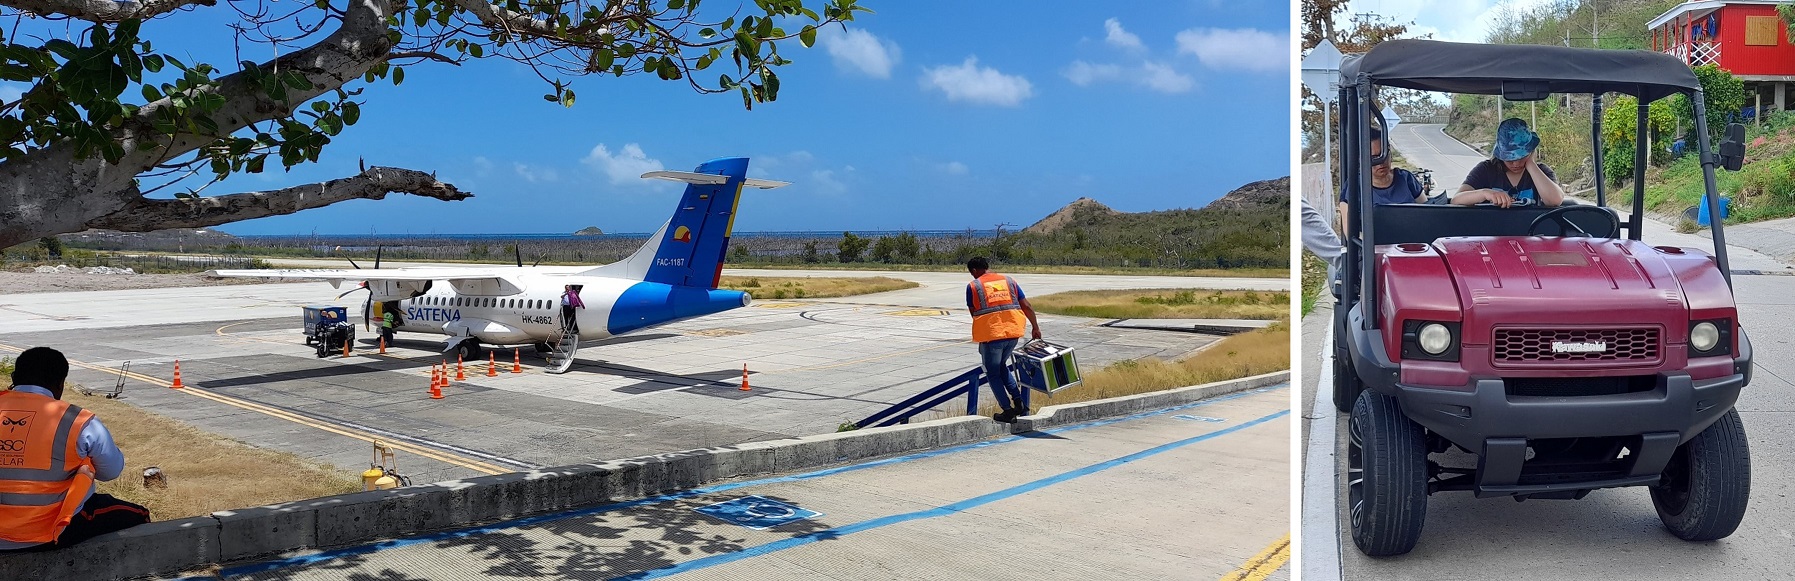 The only commercial flights to Providencia are with SATENA from San Andrés, a 30 minute hop. There are several flights per day depending on demand. You can easily hire motorbikes or buggies to get around the island. 